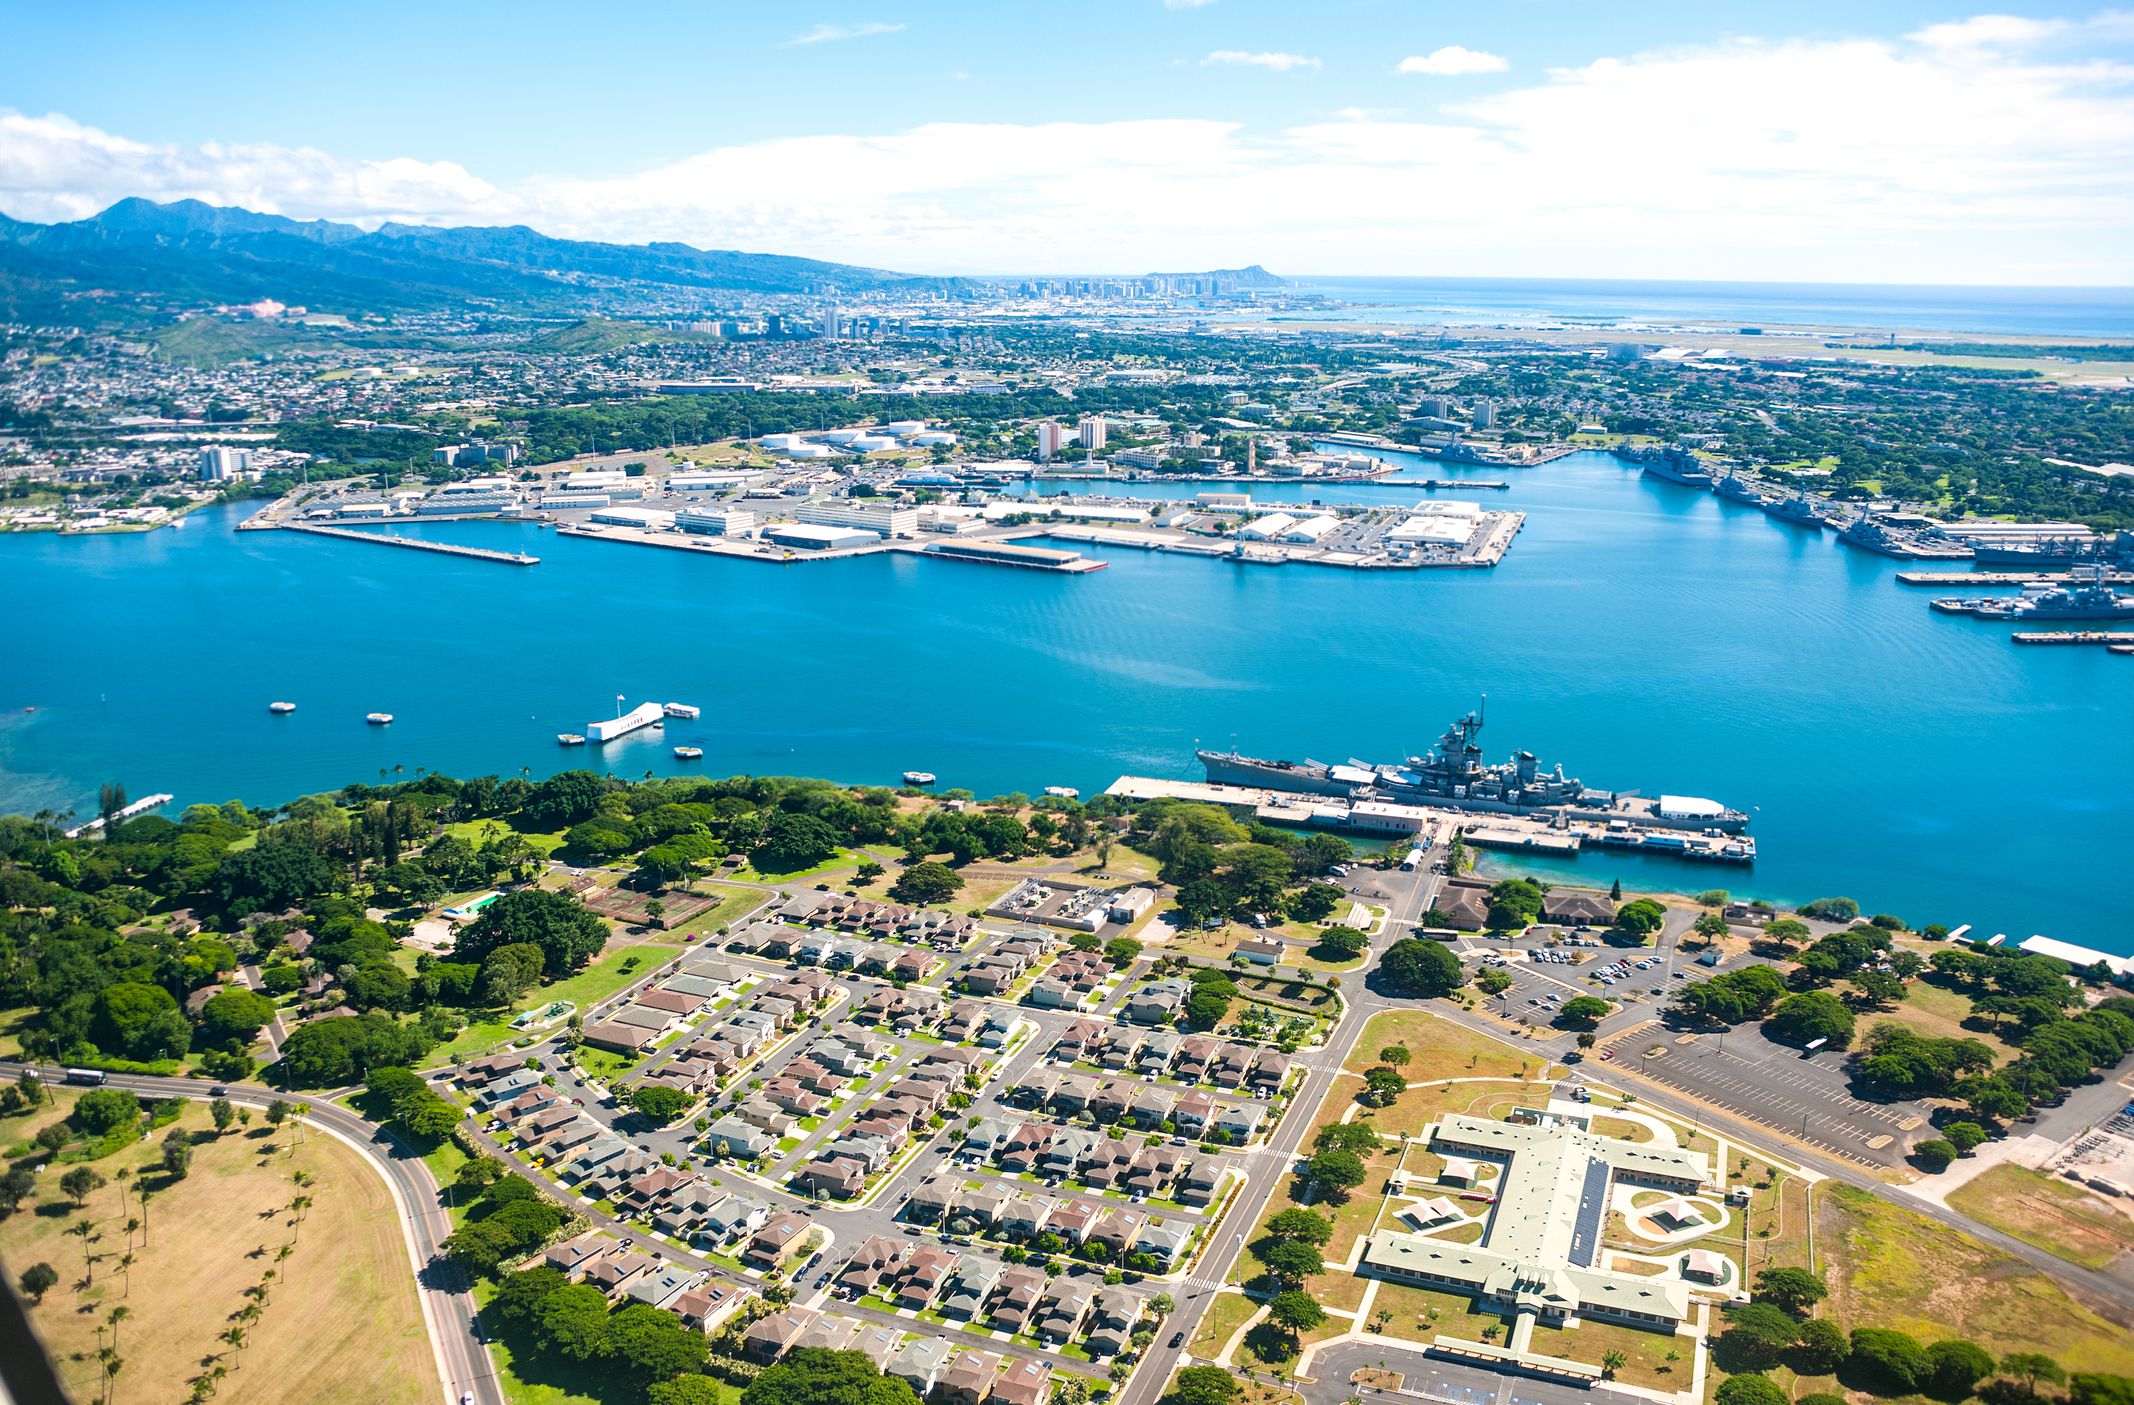 <p>Pearl City rests on the outskirts of Honolulu on the shores of Pearl Harbor. It offers a denses suburban feel with many restaurants, cafés and parks.</p><ul><li>Population: 45,295</li><li>Median Household Income: $108,772</li><li>Cost of Living: 136% of U.S. average</li><li>Median Rent Price: $2,650</li><li>Home Price-to-Income Ratio: 8.34</li><li>Average Property Tax: 0.32%</li></ul><p class="padding-top-ms u-margin-bottom-ms"><b>Housing Affordability: </b>Young people looking to rent in Pearl City will pay an average of $2,650. Prices have risen precipitously year over year. The average home value here is around $900,000.</p>